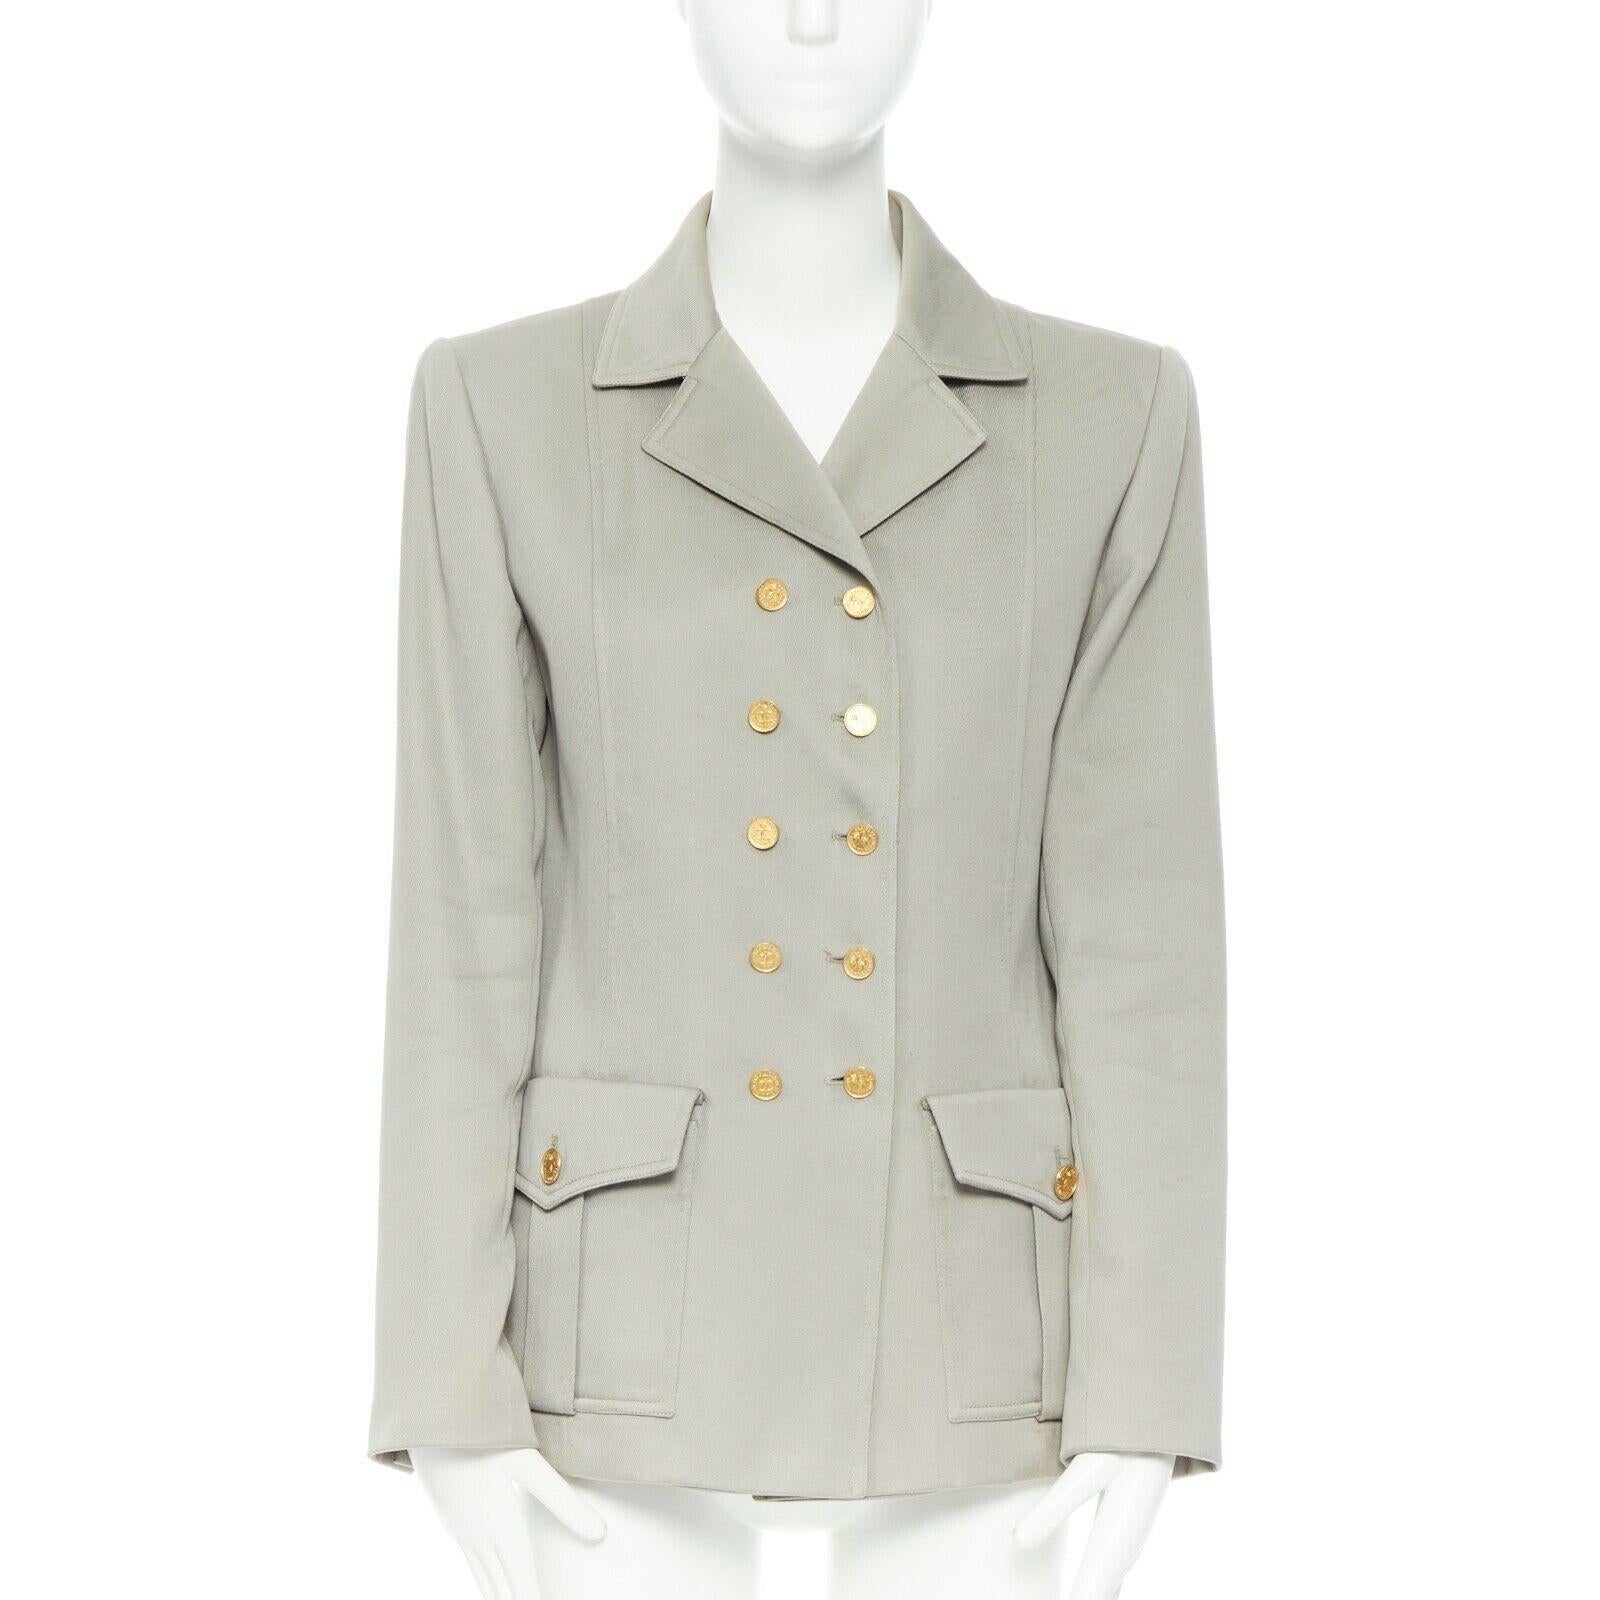 CHANEL Vintage pale grey twill logo button double breast military blazer jacket
Brand: CHANEL
Designer: Karl Lagerfeld
Model Name / Style: Military jacket
Material: Other; composition label removed. Feels like wool/
Color: Grey
Pattern: